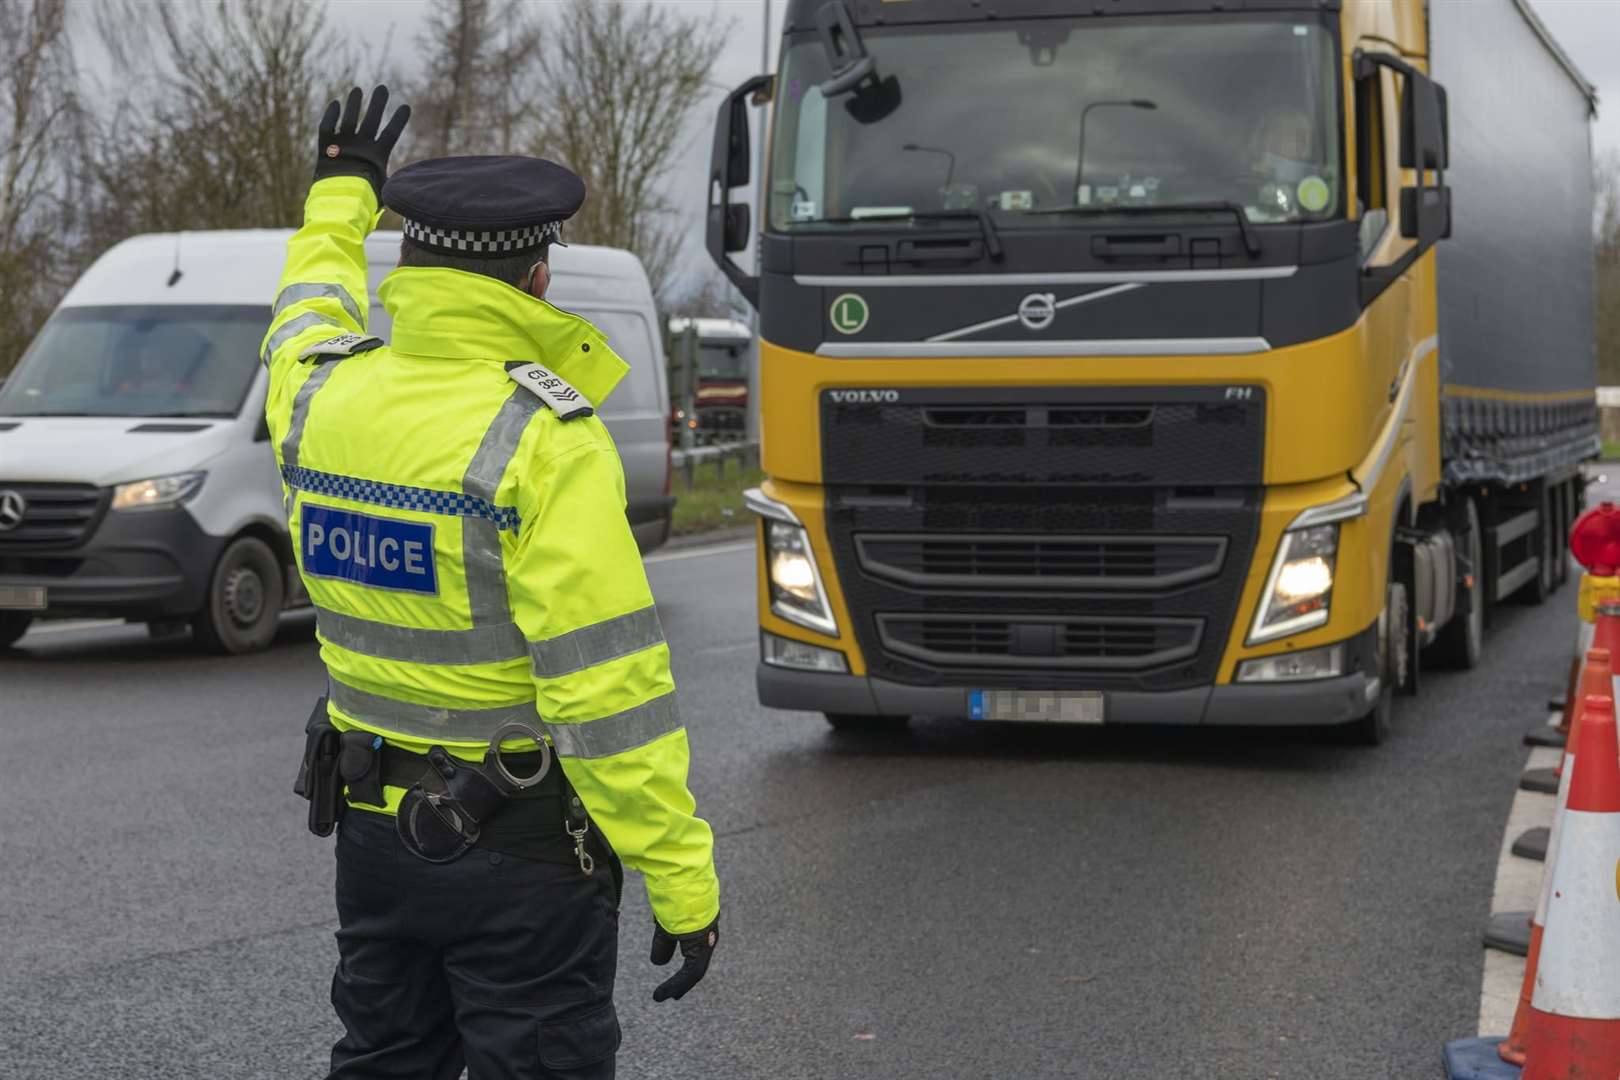 There has been a parking ban for lorries since January